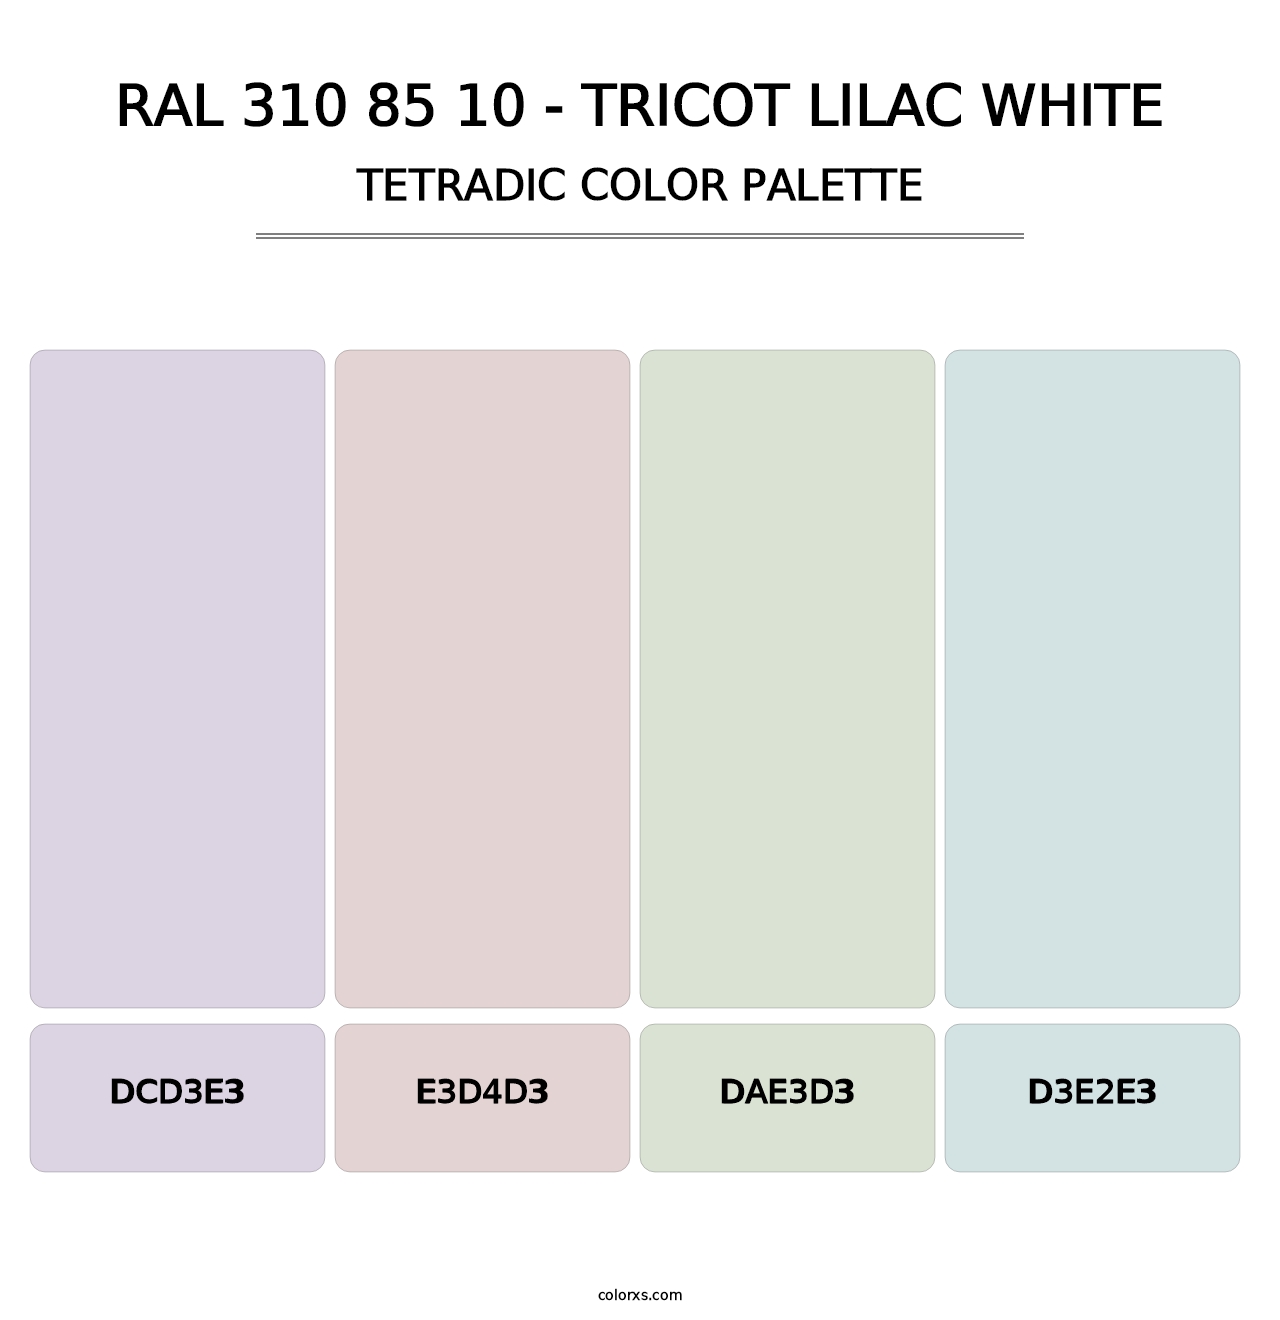 RAL 310 85 10 - Tricot Lilac White - Tetradic Color Palette